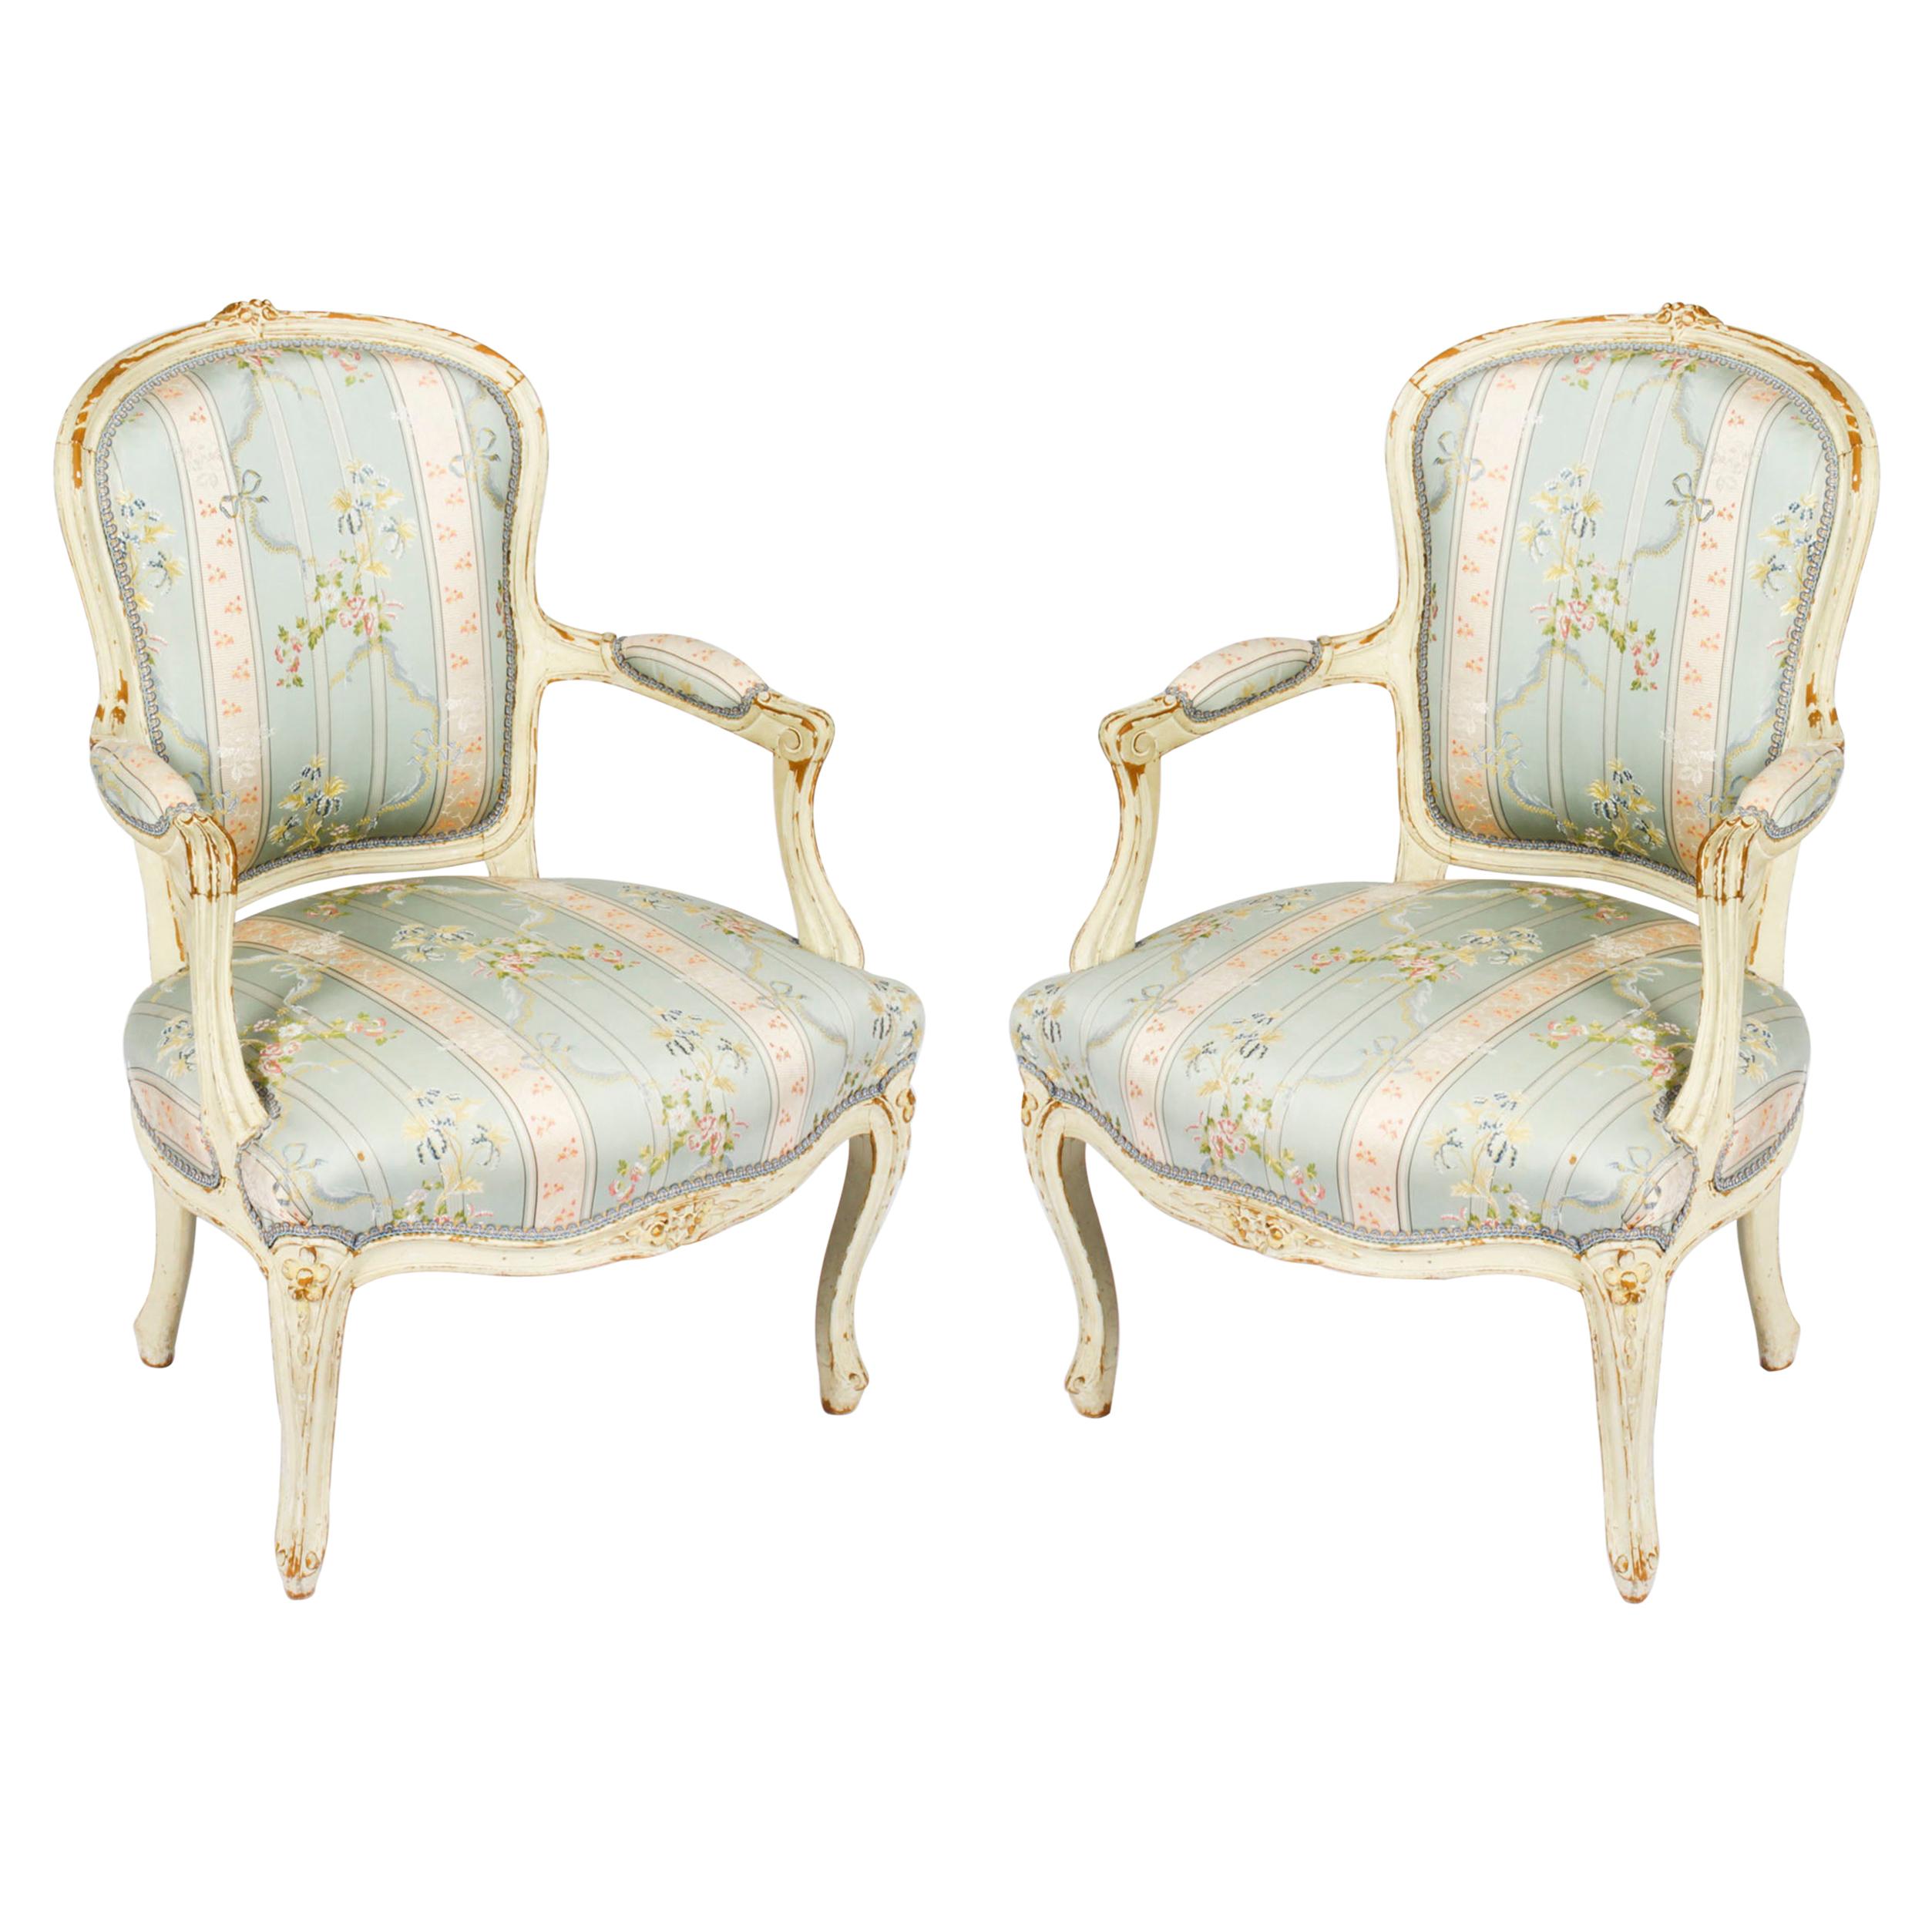 Antique Pair Shabby Chic Louis Revival French Painted Armchairs, 19th Century For Sale